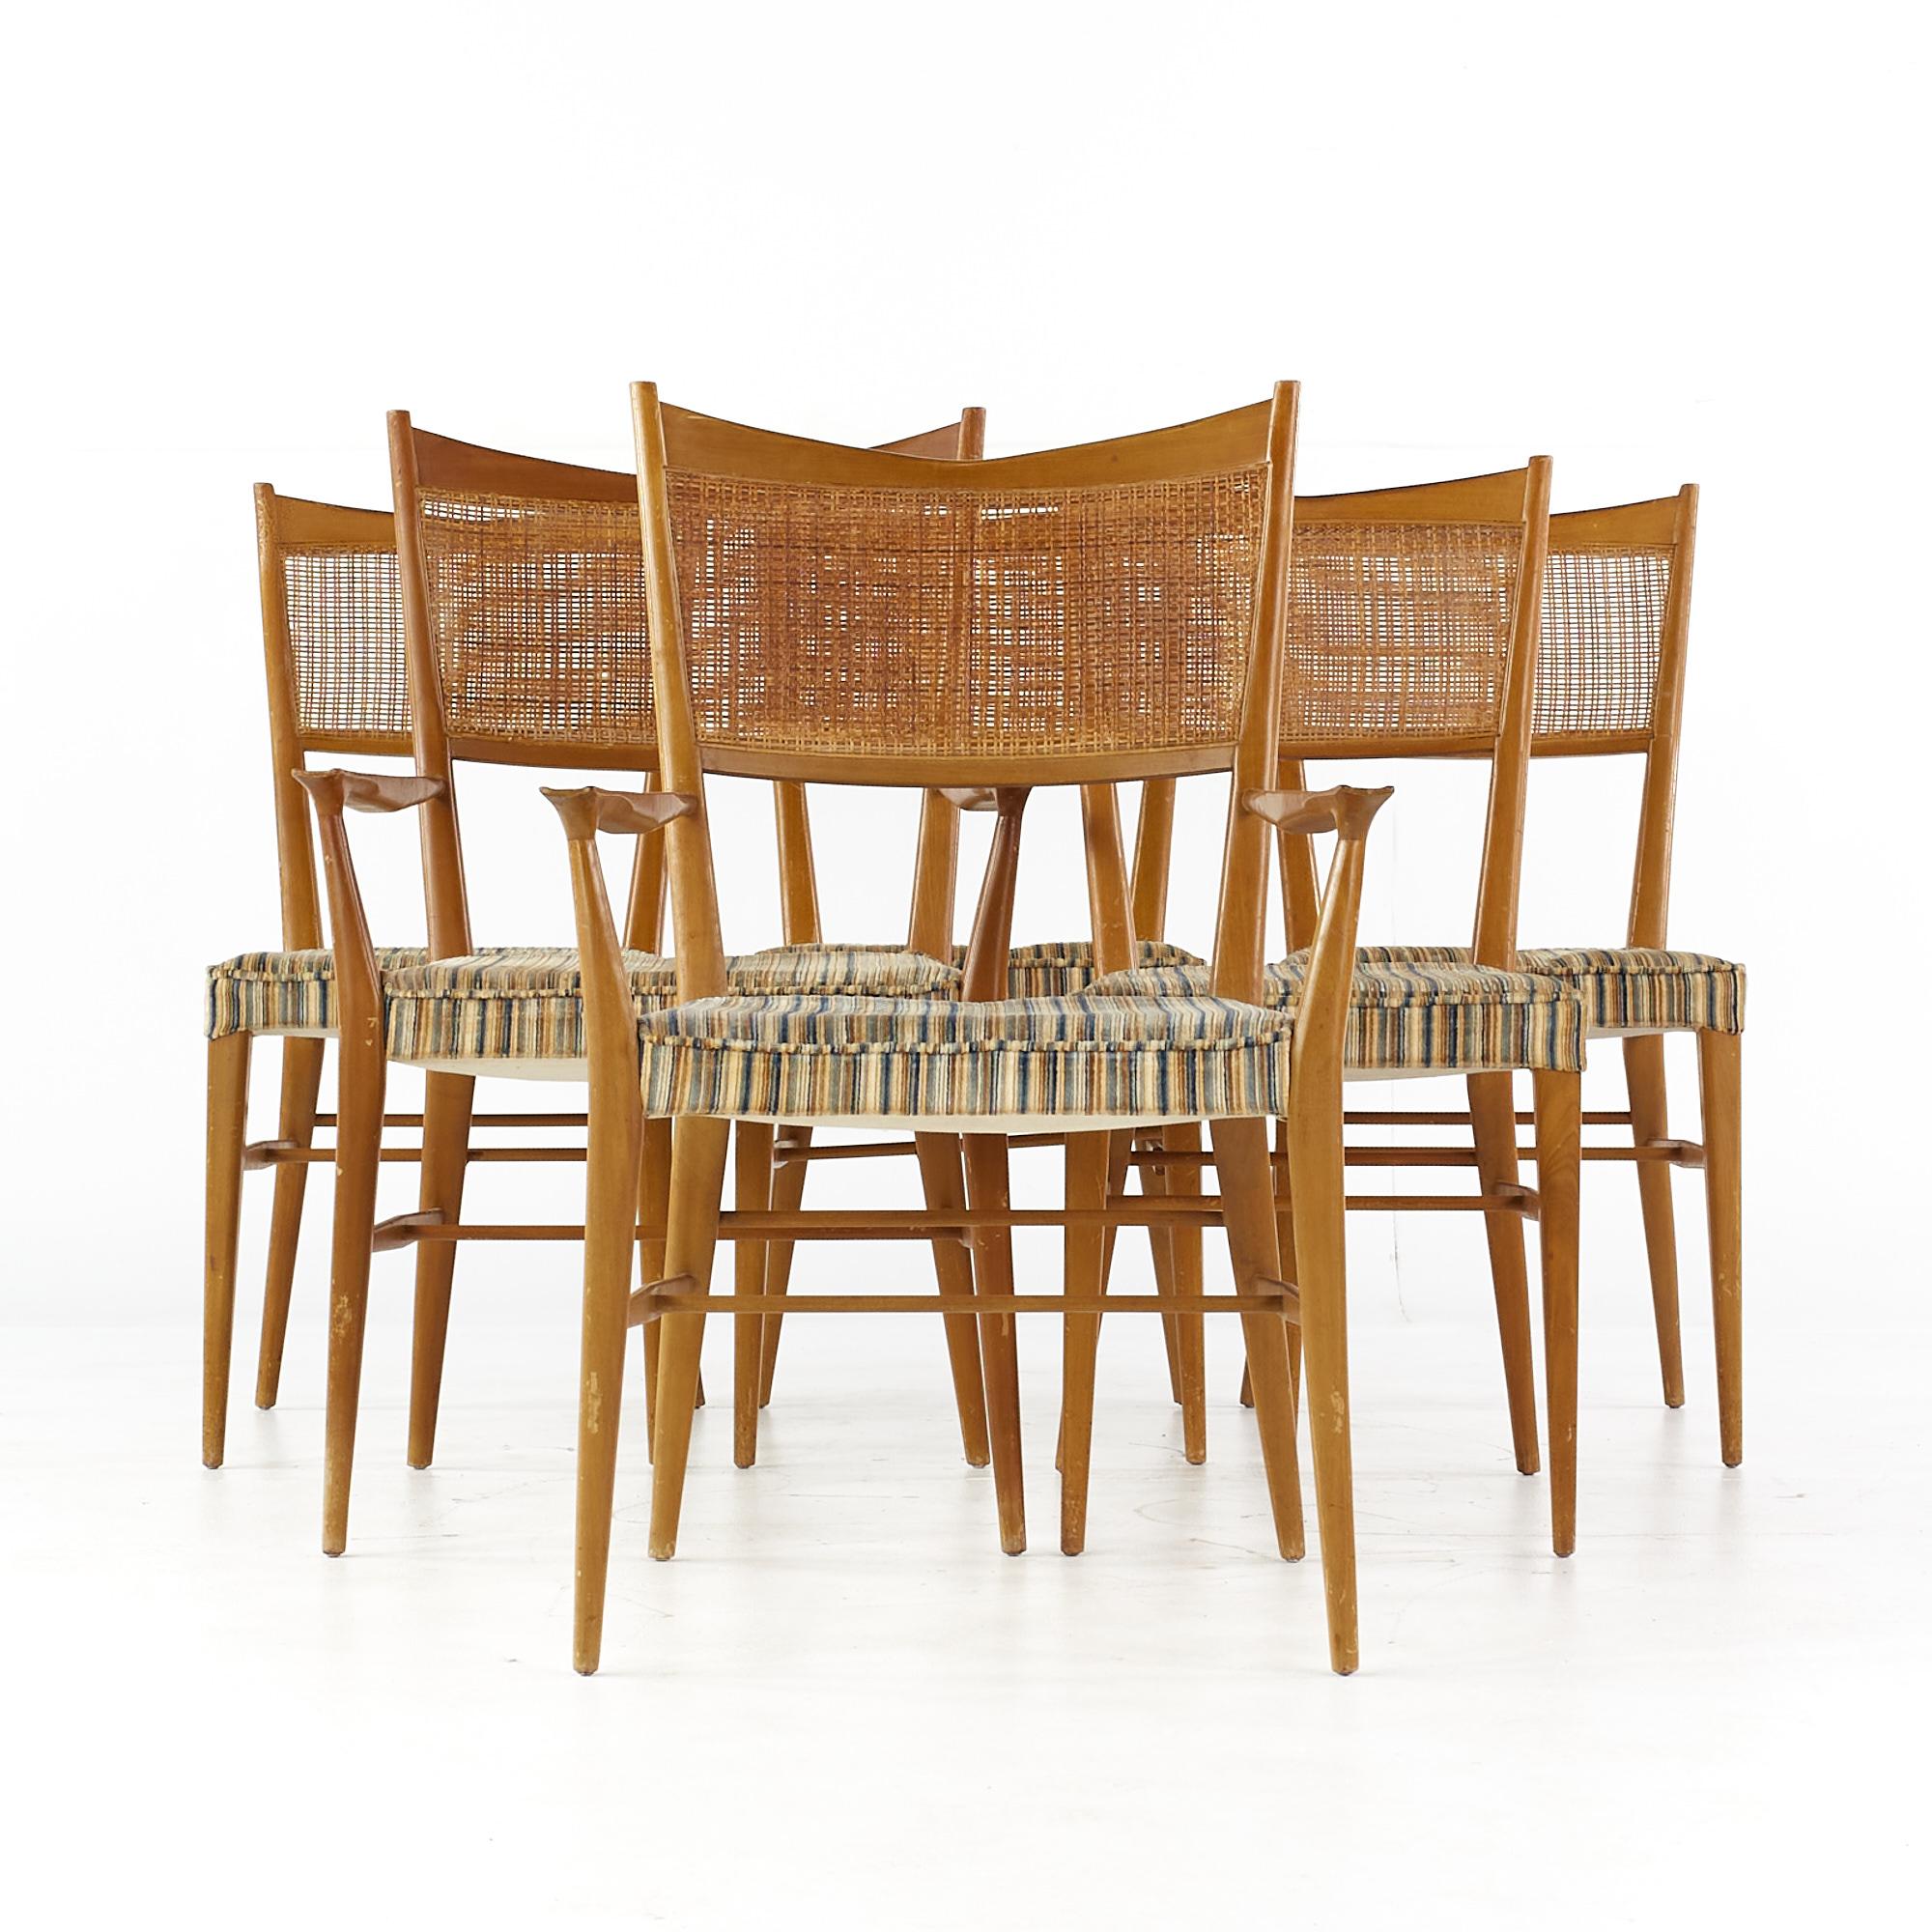 Paul McCobb for Directional Mid Century walnut and cane dining chairs - set of 6

Each armless chair measures: 16.5 wide x 16.5 deep x 34.5 high, with a seat height of 17.25 inches
Each captains chair measures: 23 wide x 20 deep x 36 high, with a